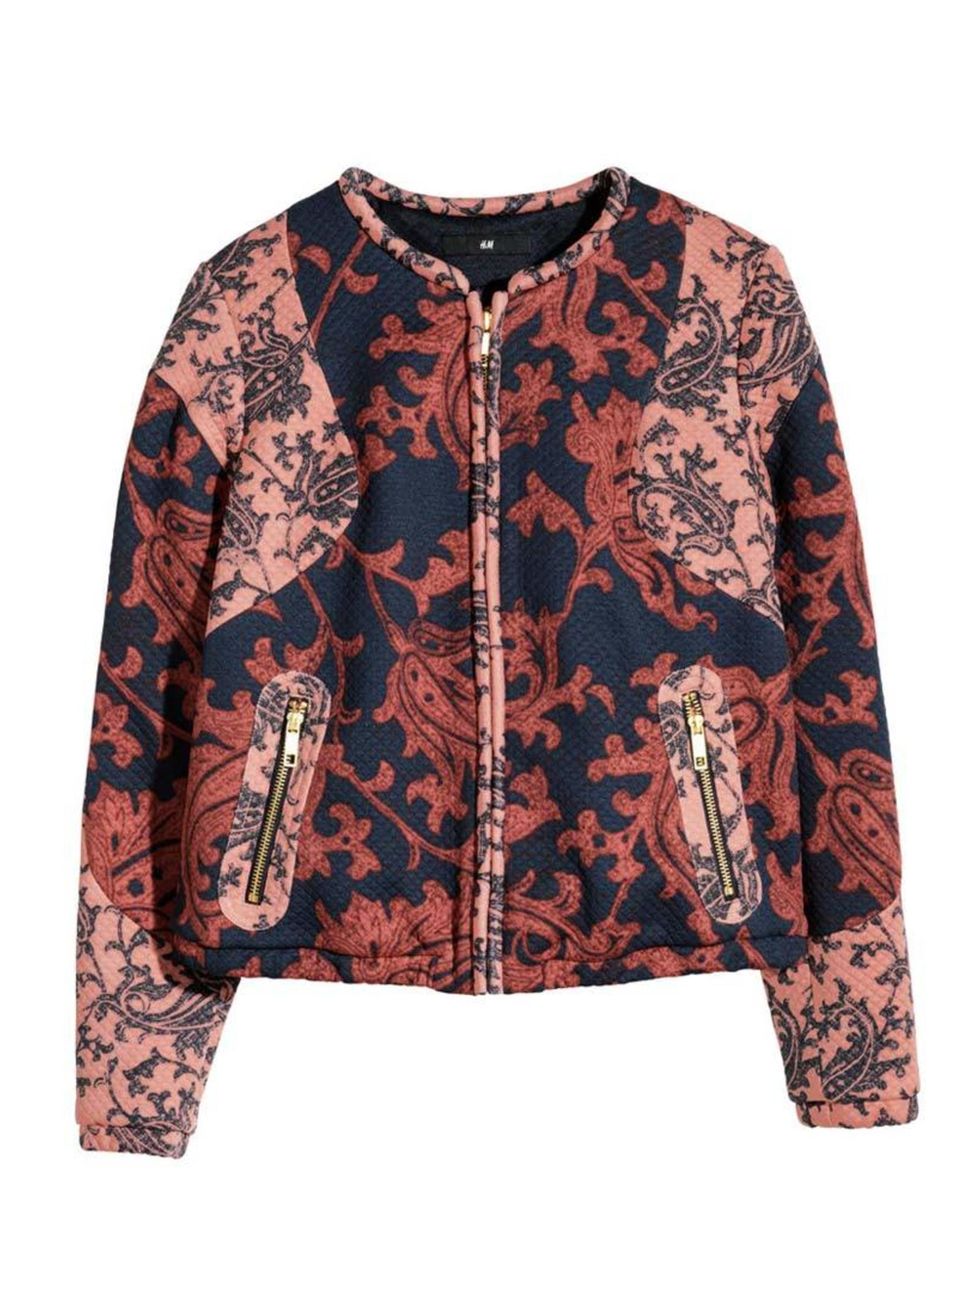 <p>Make the most of the cold, and step-up your jacket game.</p>

<p><a href="http://www.hm.com/gb/product/57390?article=57390-A" target="_blank">H&M</a> jacket, £39.99</p>